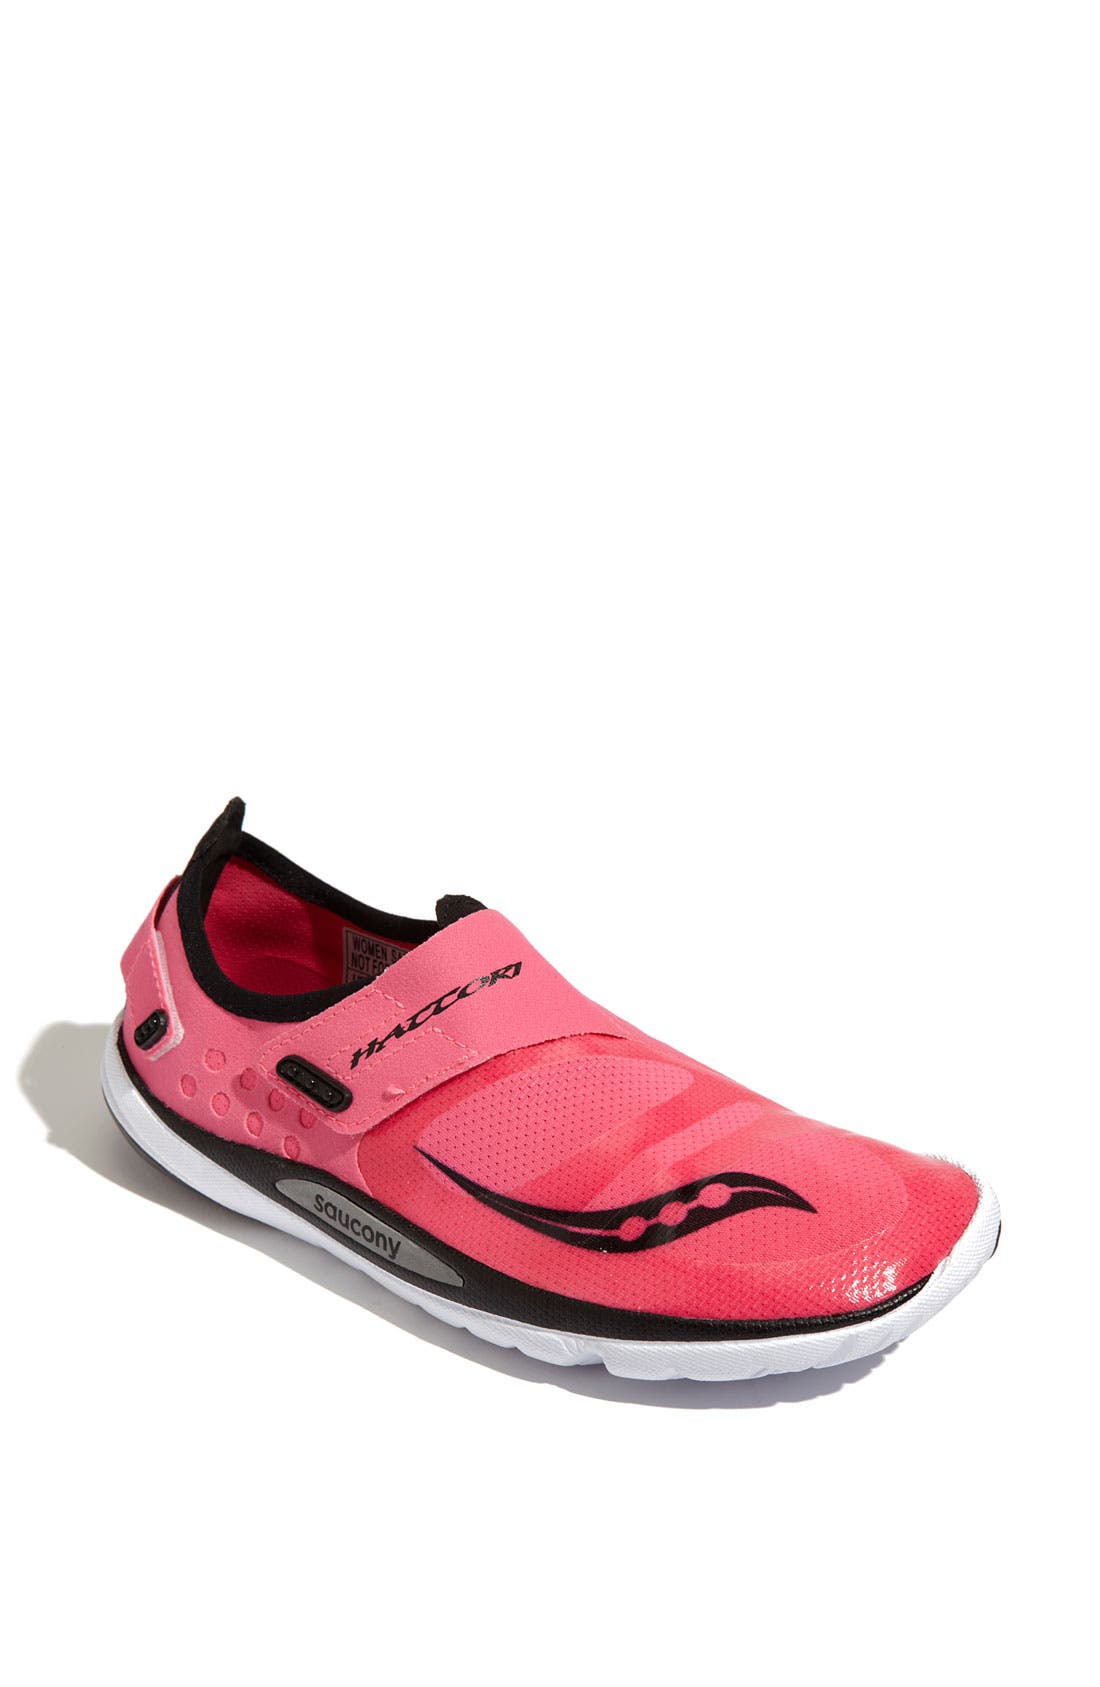 saucony lady hattori running shoes